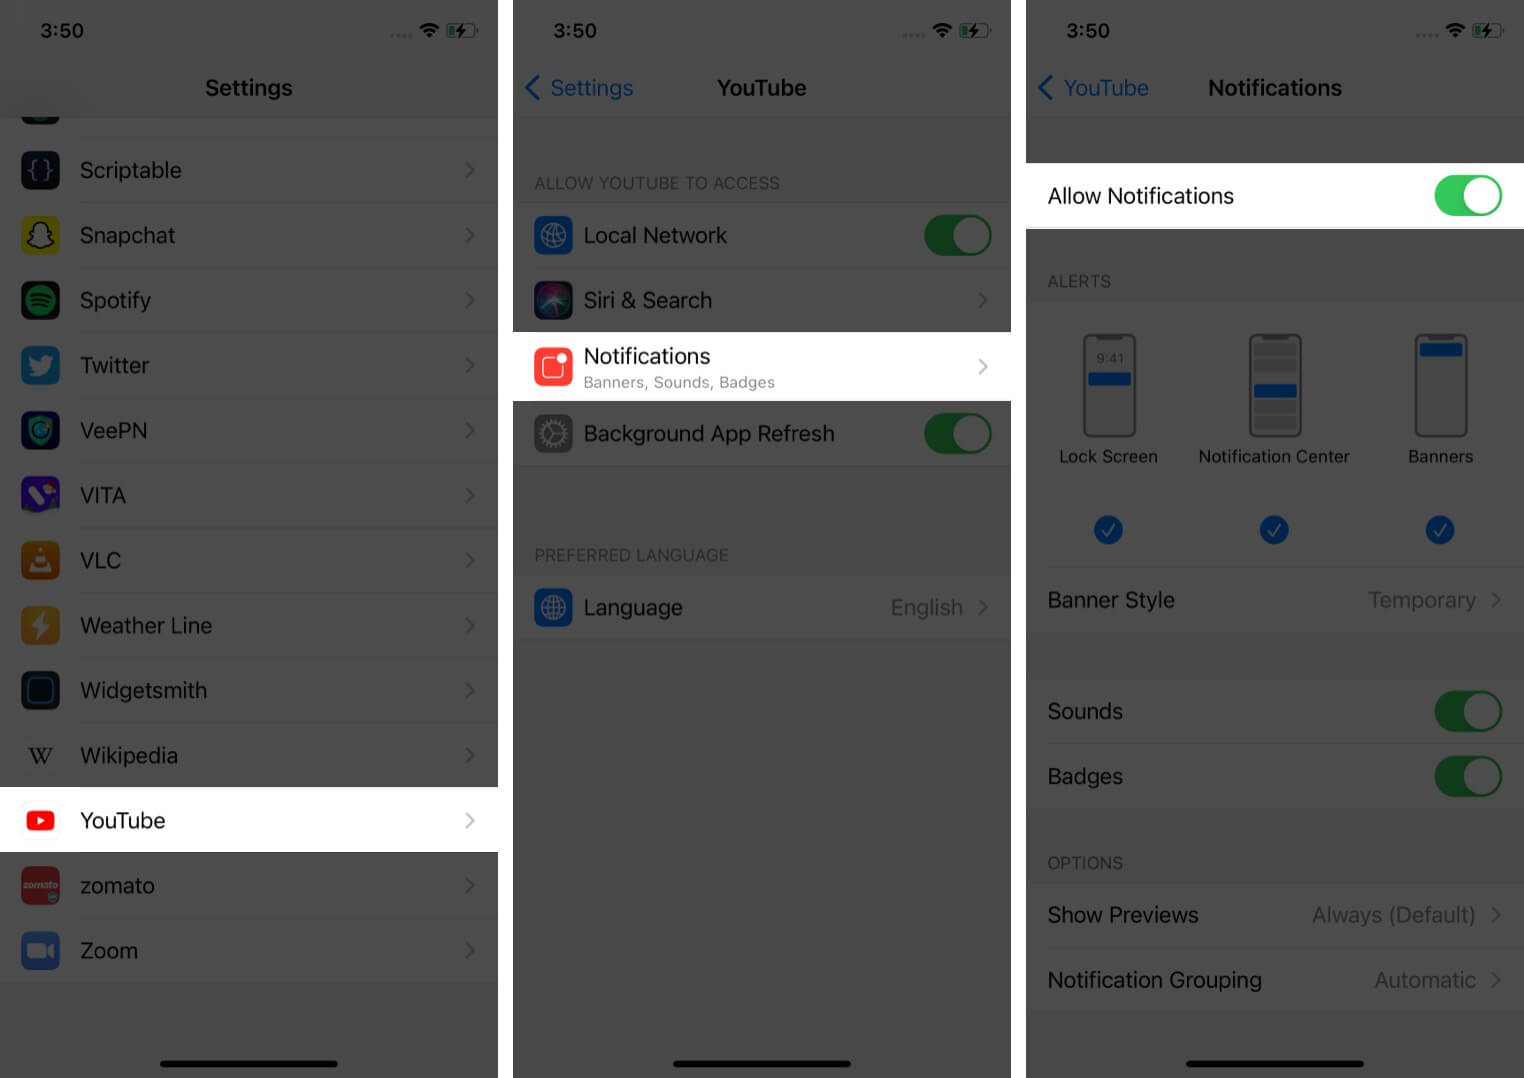 Turn YouTube Notifications On or Off through Youtube in iPhone Settings